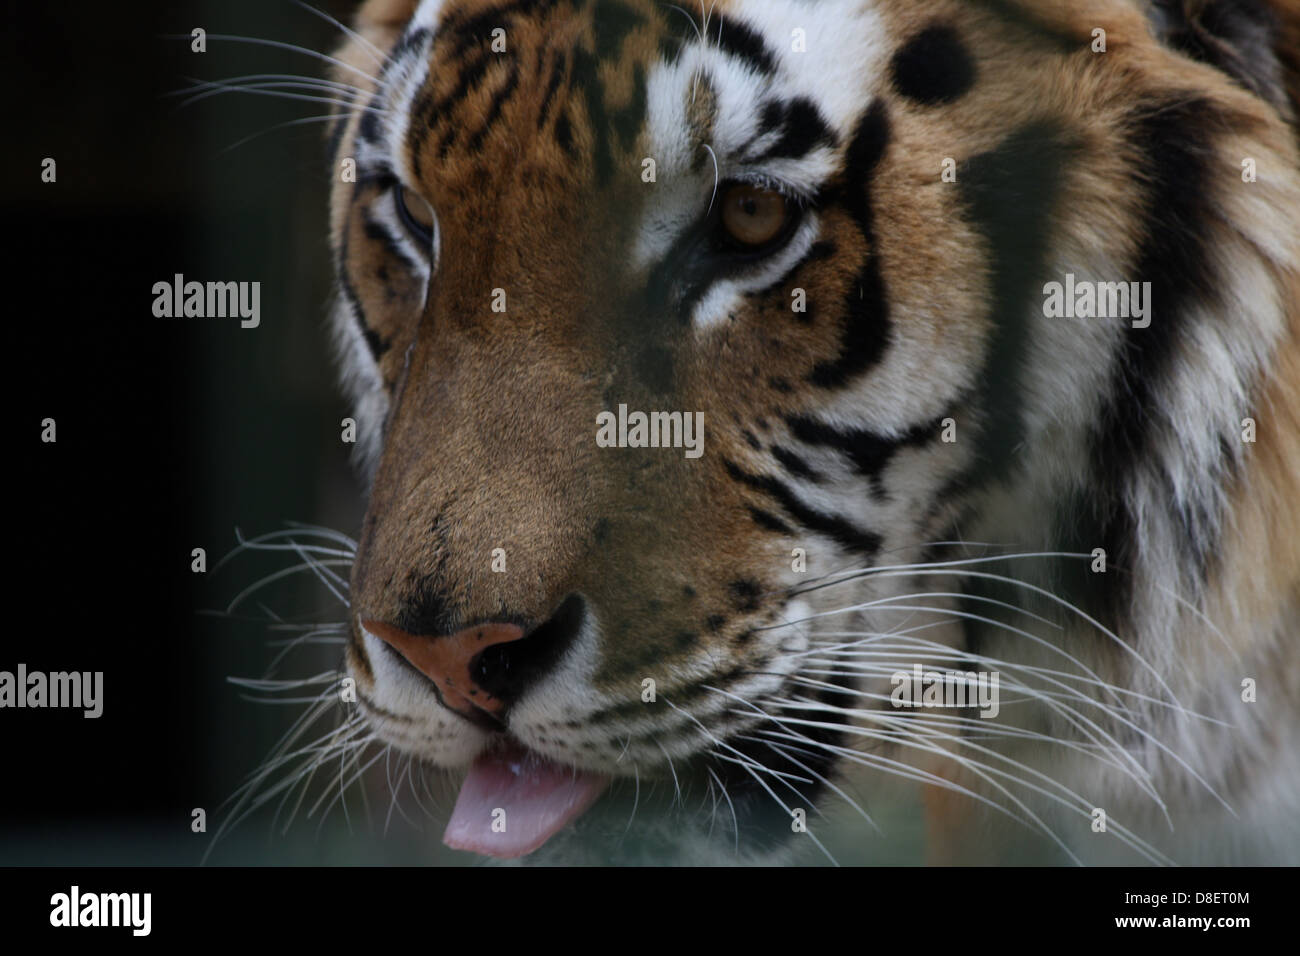 Tiger with his tongue out in a zoo enclosure. Stock Photo